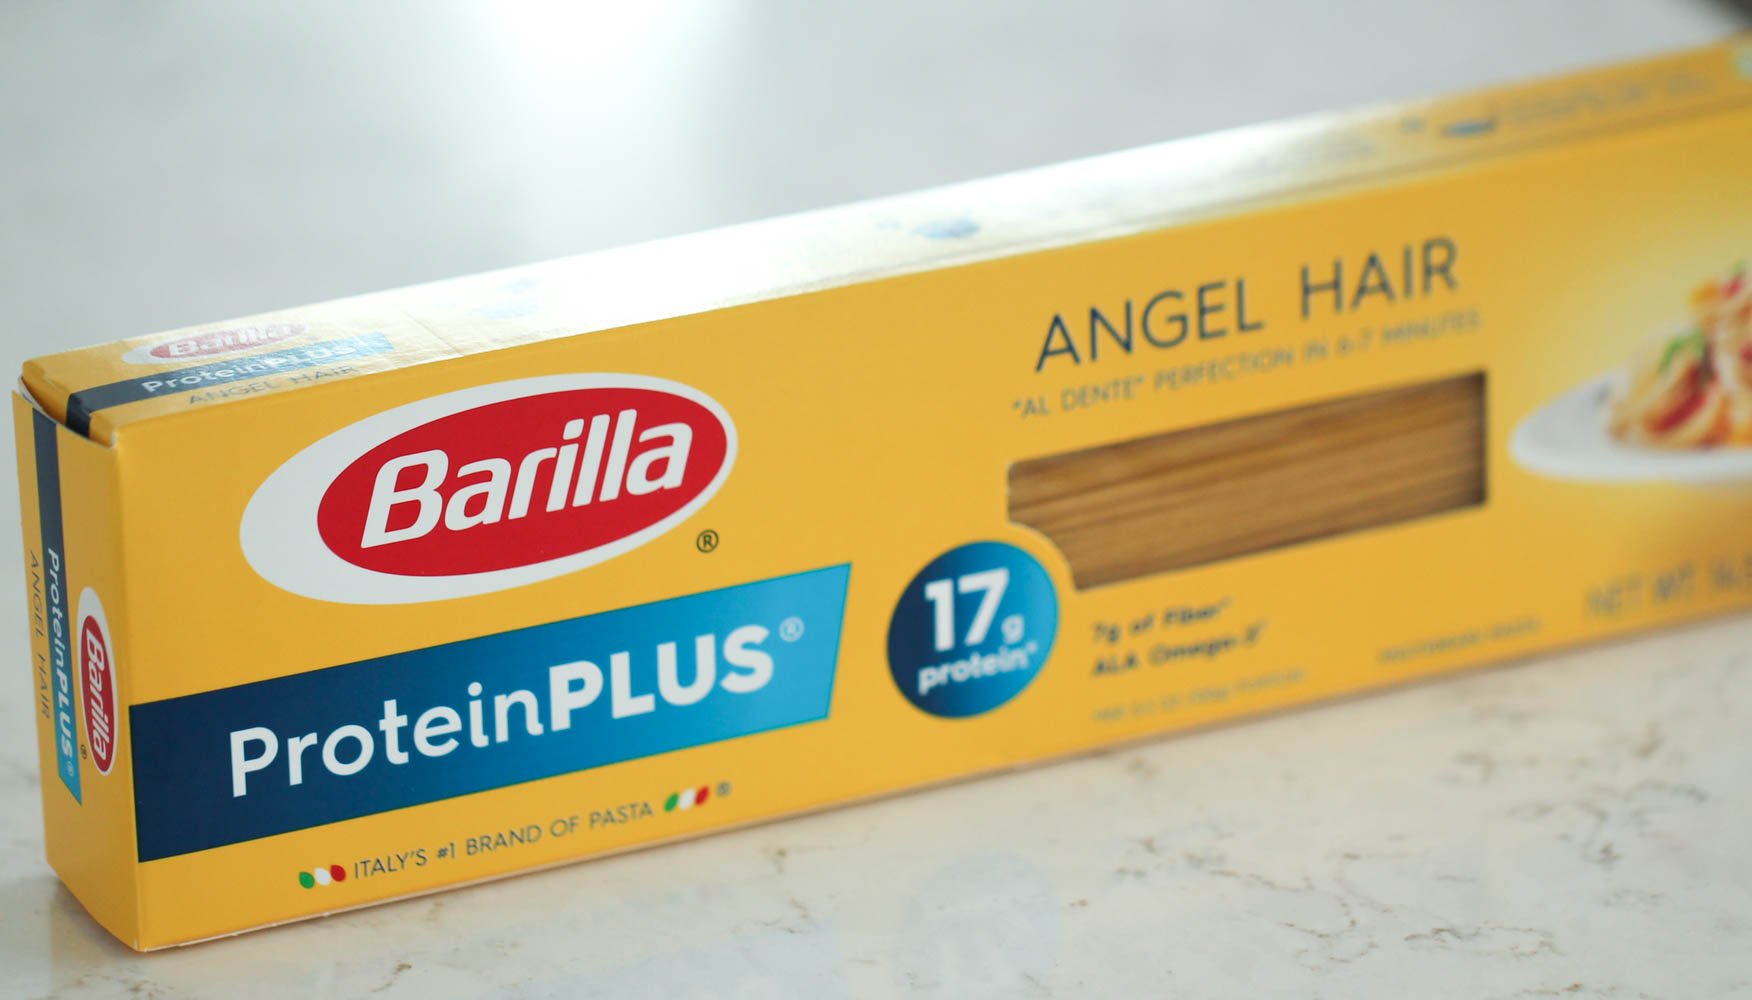 A box of Angel Hair protein plus pasta